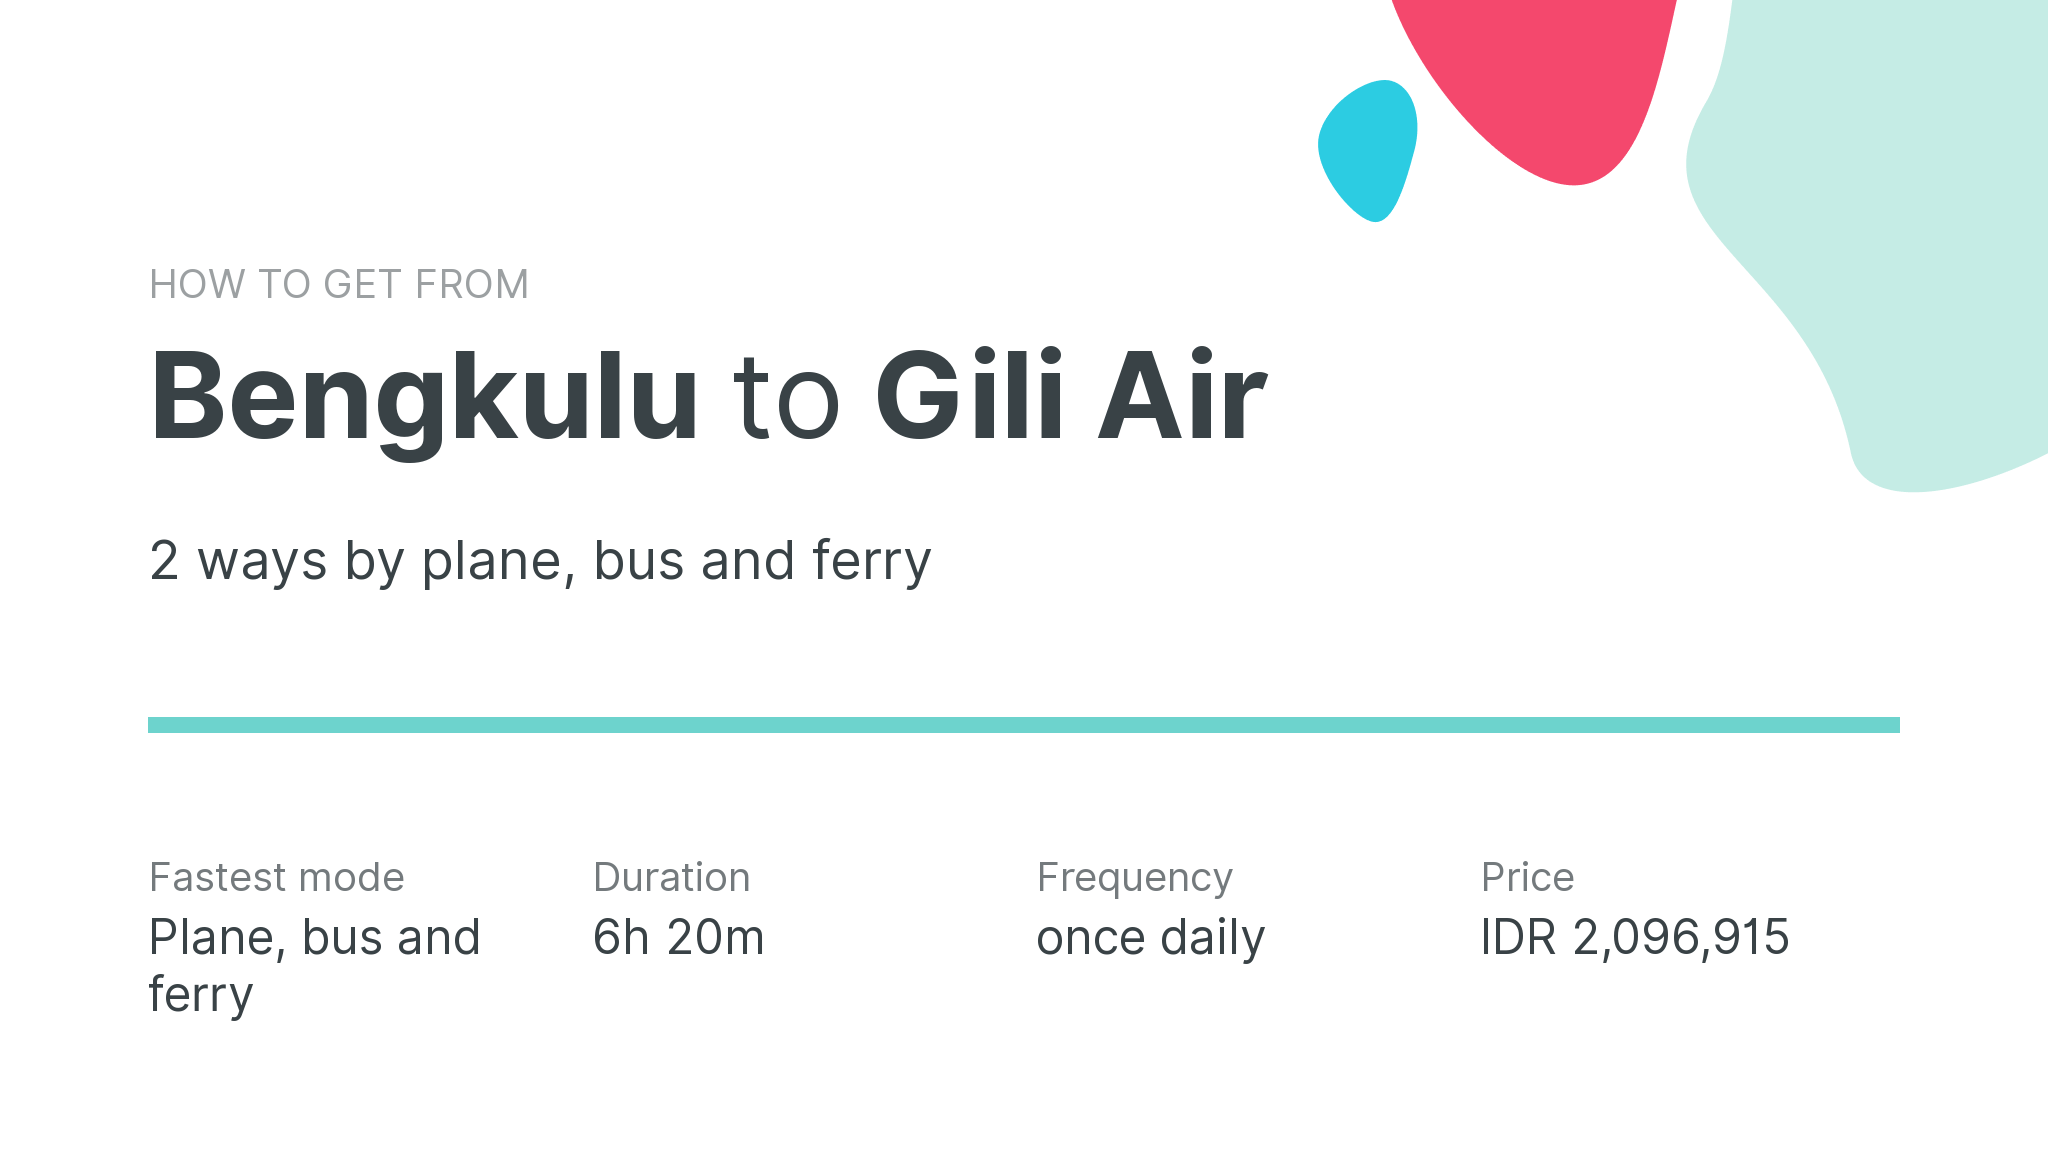 How do I get from Bengkulu to Gili Air